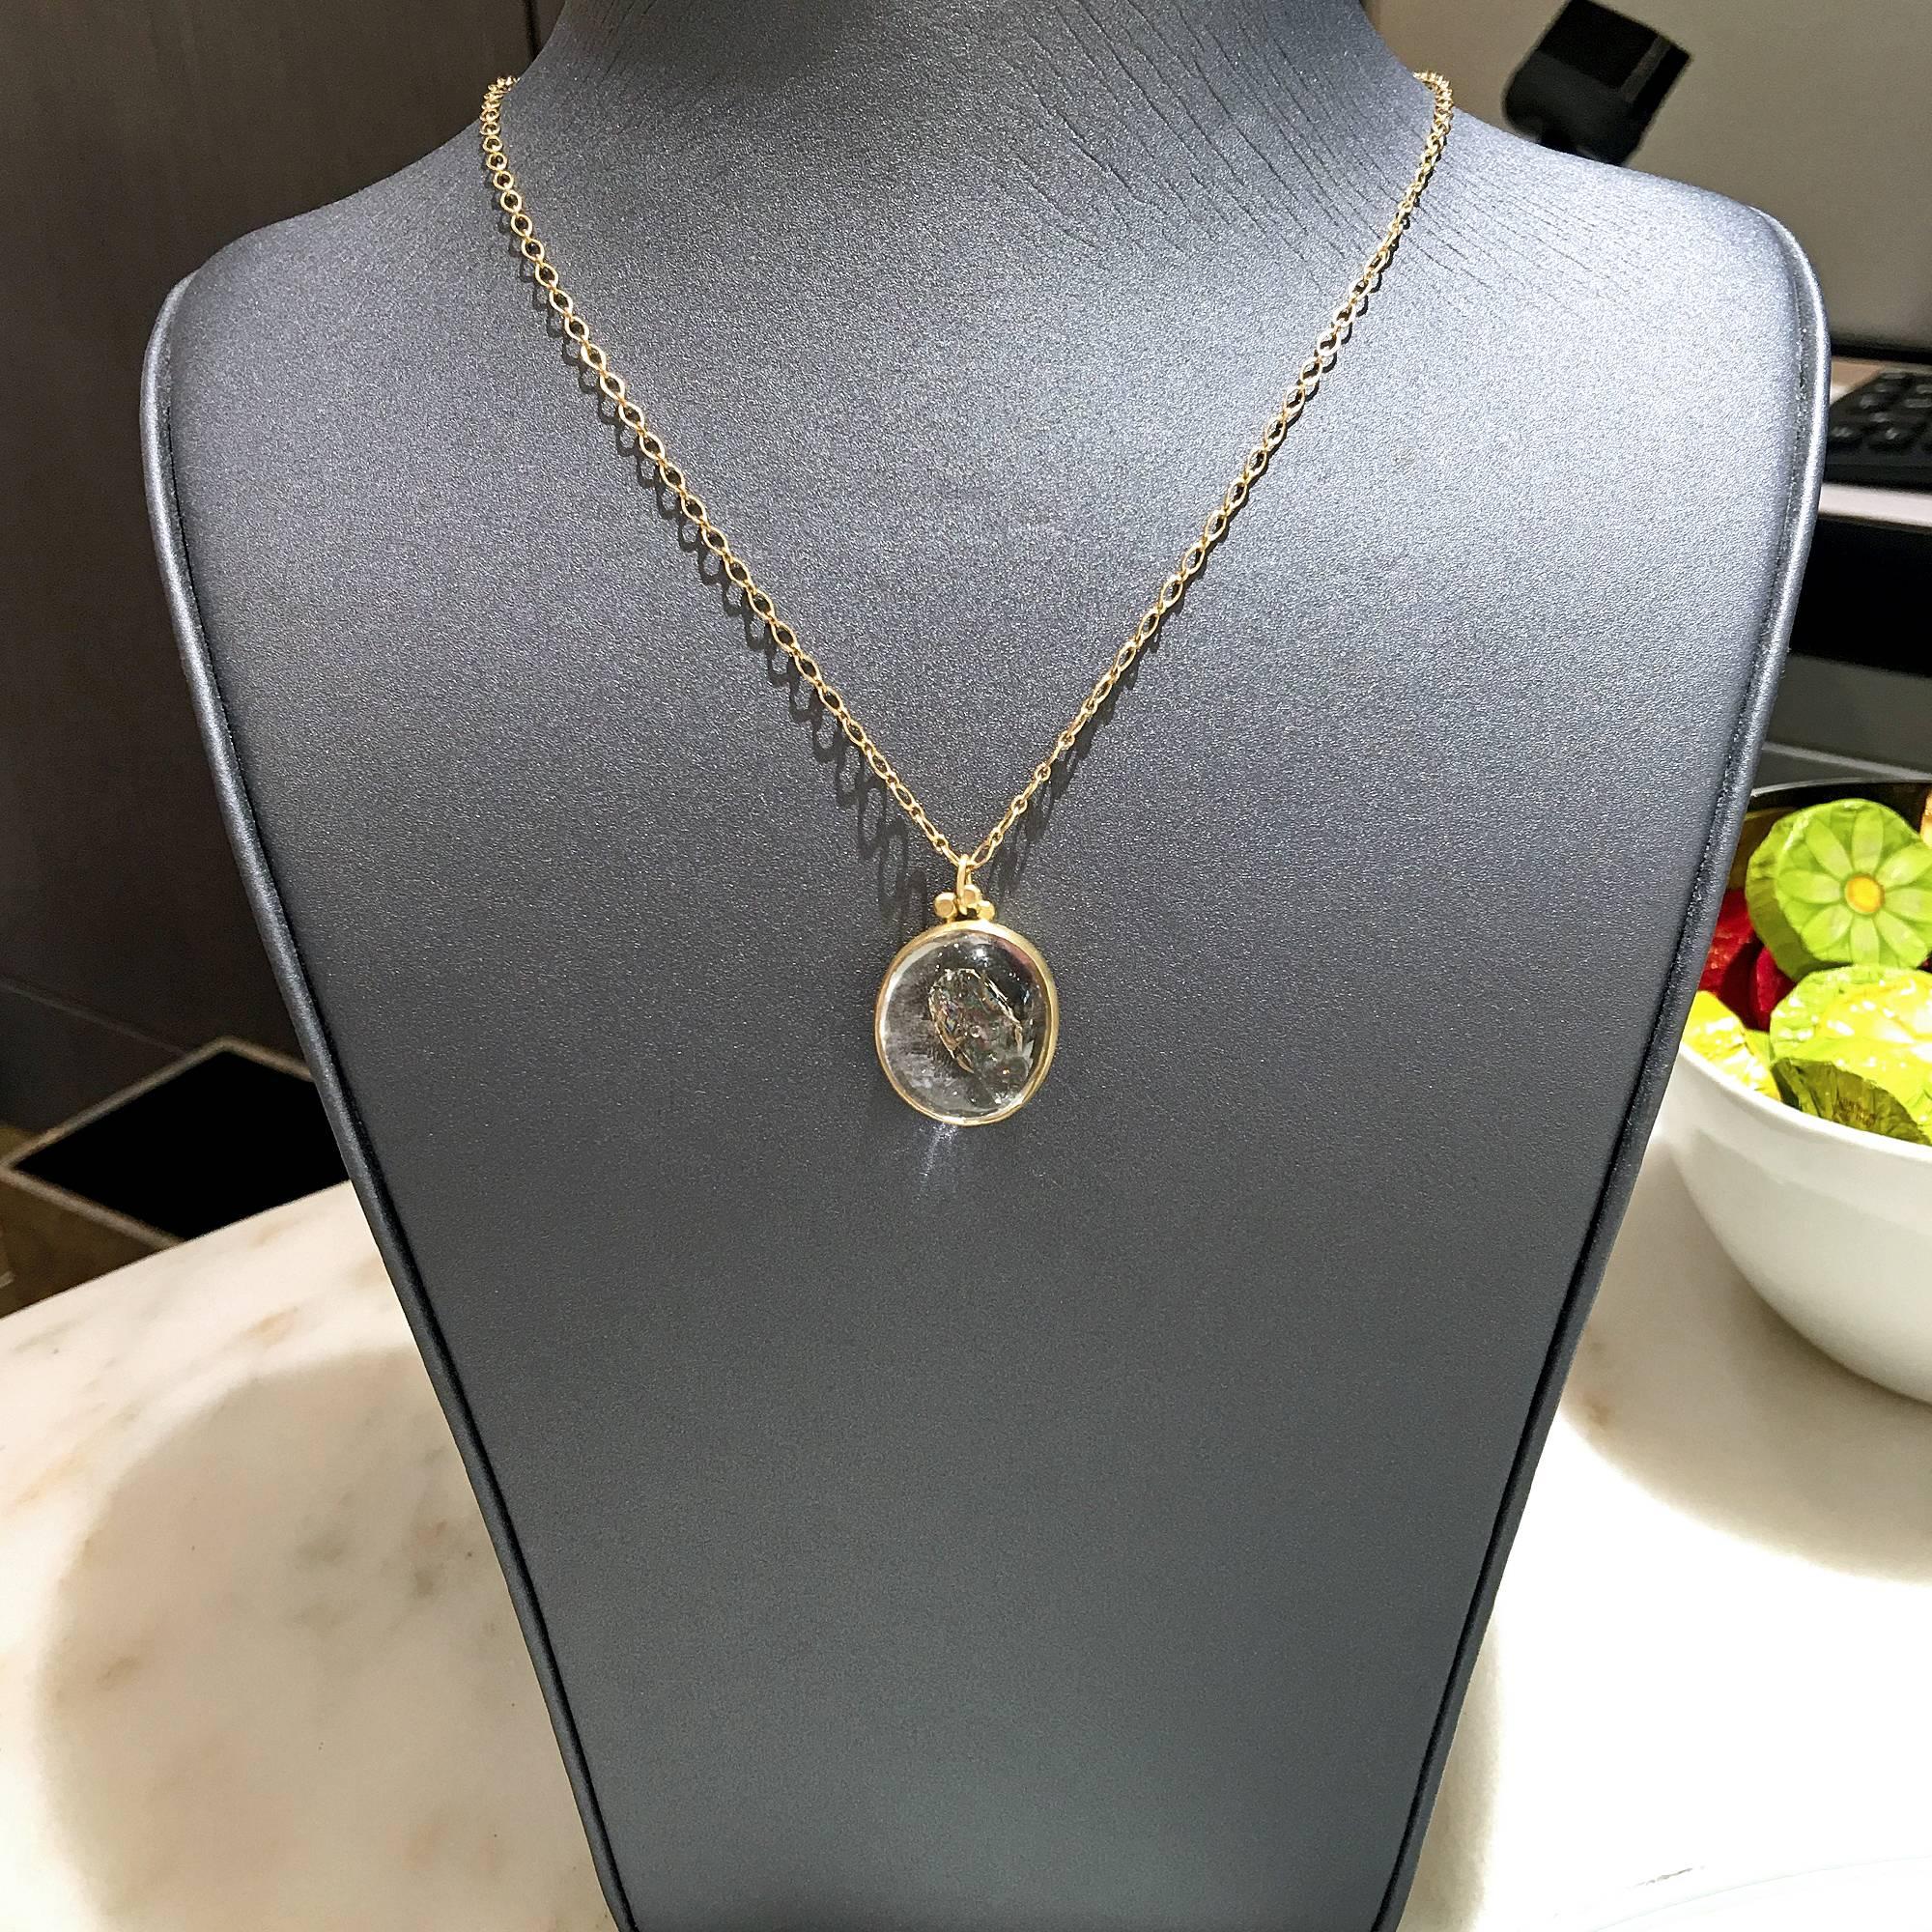 One of a Kind Necklace handcrafted by Monica Marcella in matte-finished 18k yellow gold featuring a unique enhydro quartz with a floating bubble in the center that circulates within the gemstone with any movement. The characteristics within the